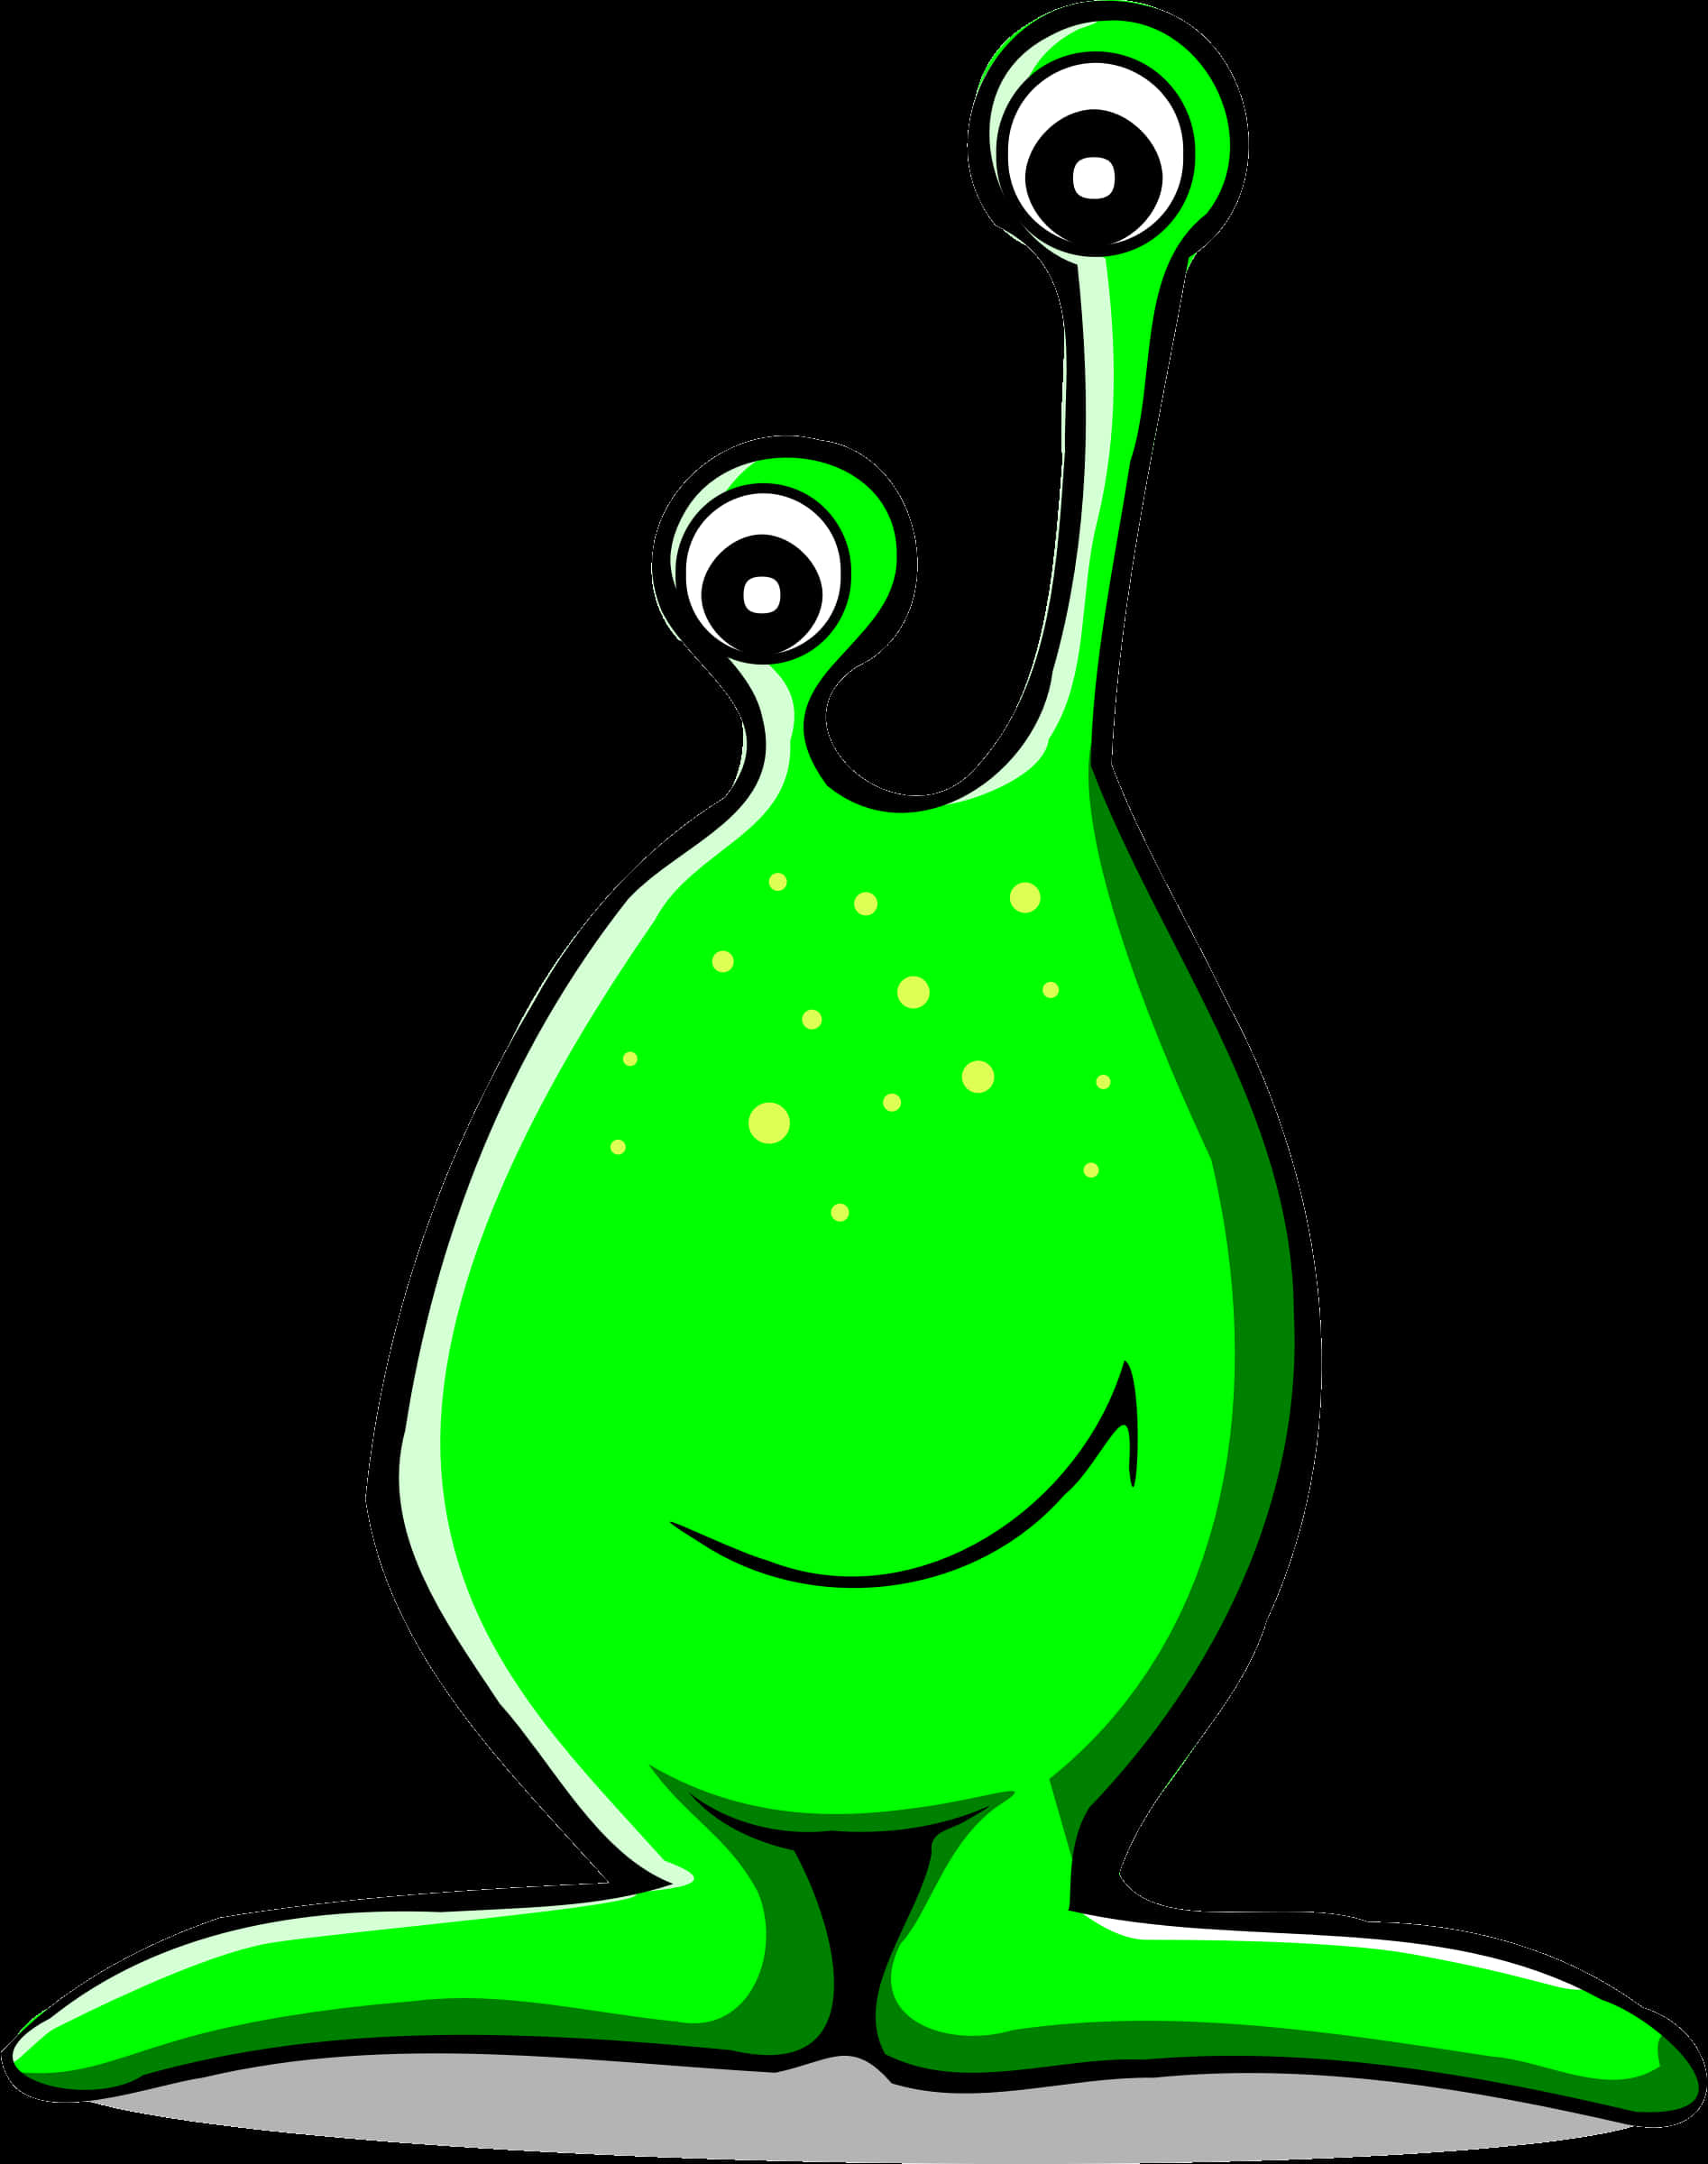 A Green Alien With One Eye And Mouth